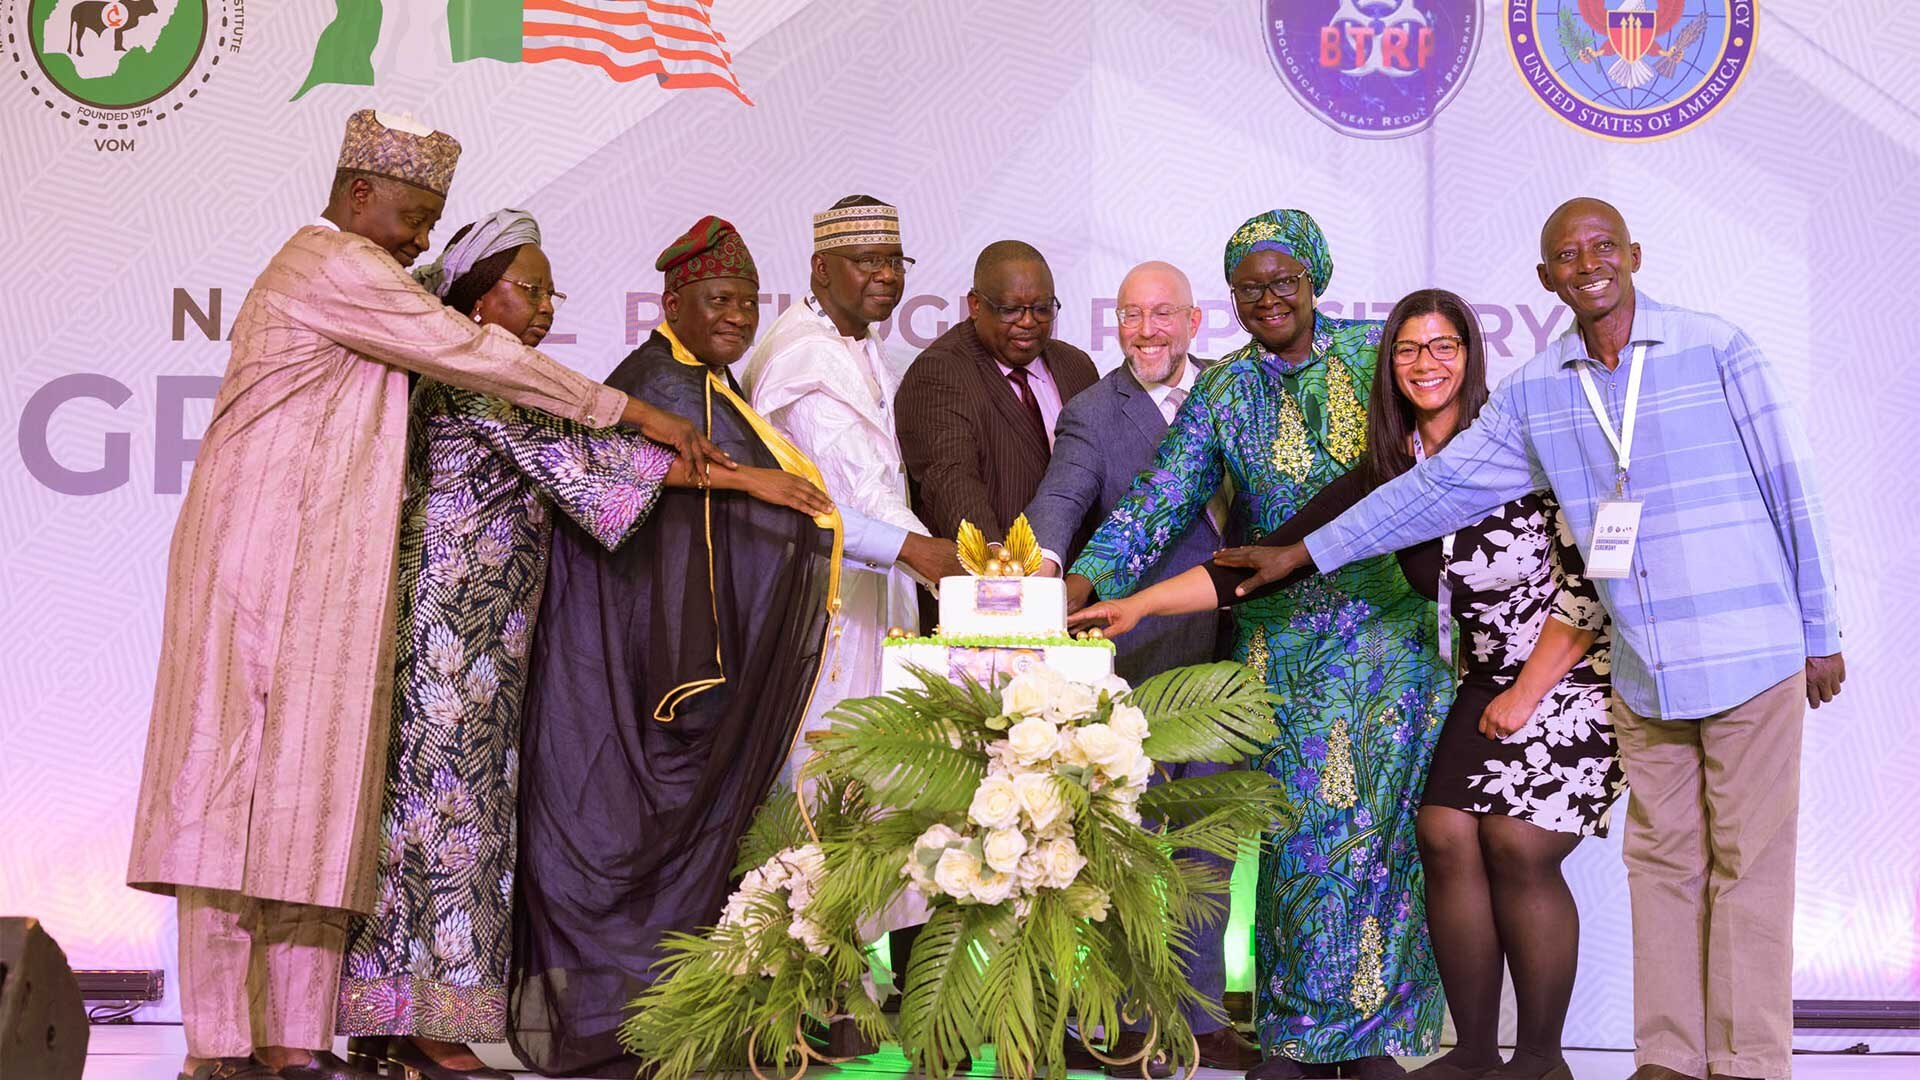 Strengthening Biosecurity in Nigeria: A Groundbreaking Ceremony with the Defense Threat Reduction Agency and Nigeria’s National Veterinary Research Institute